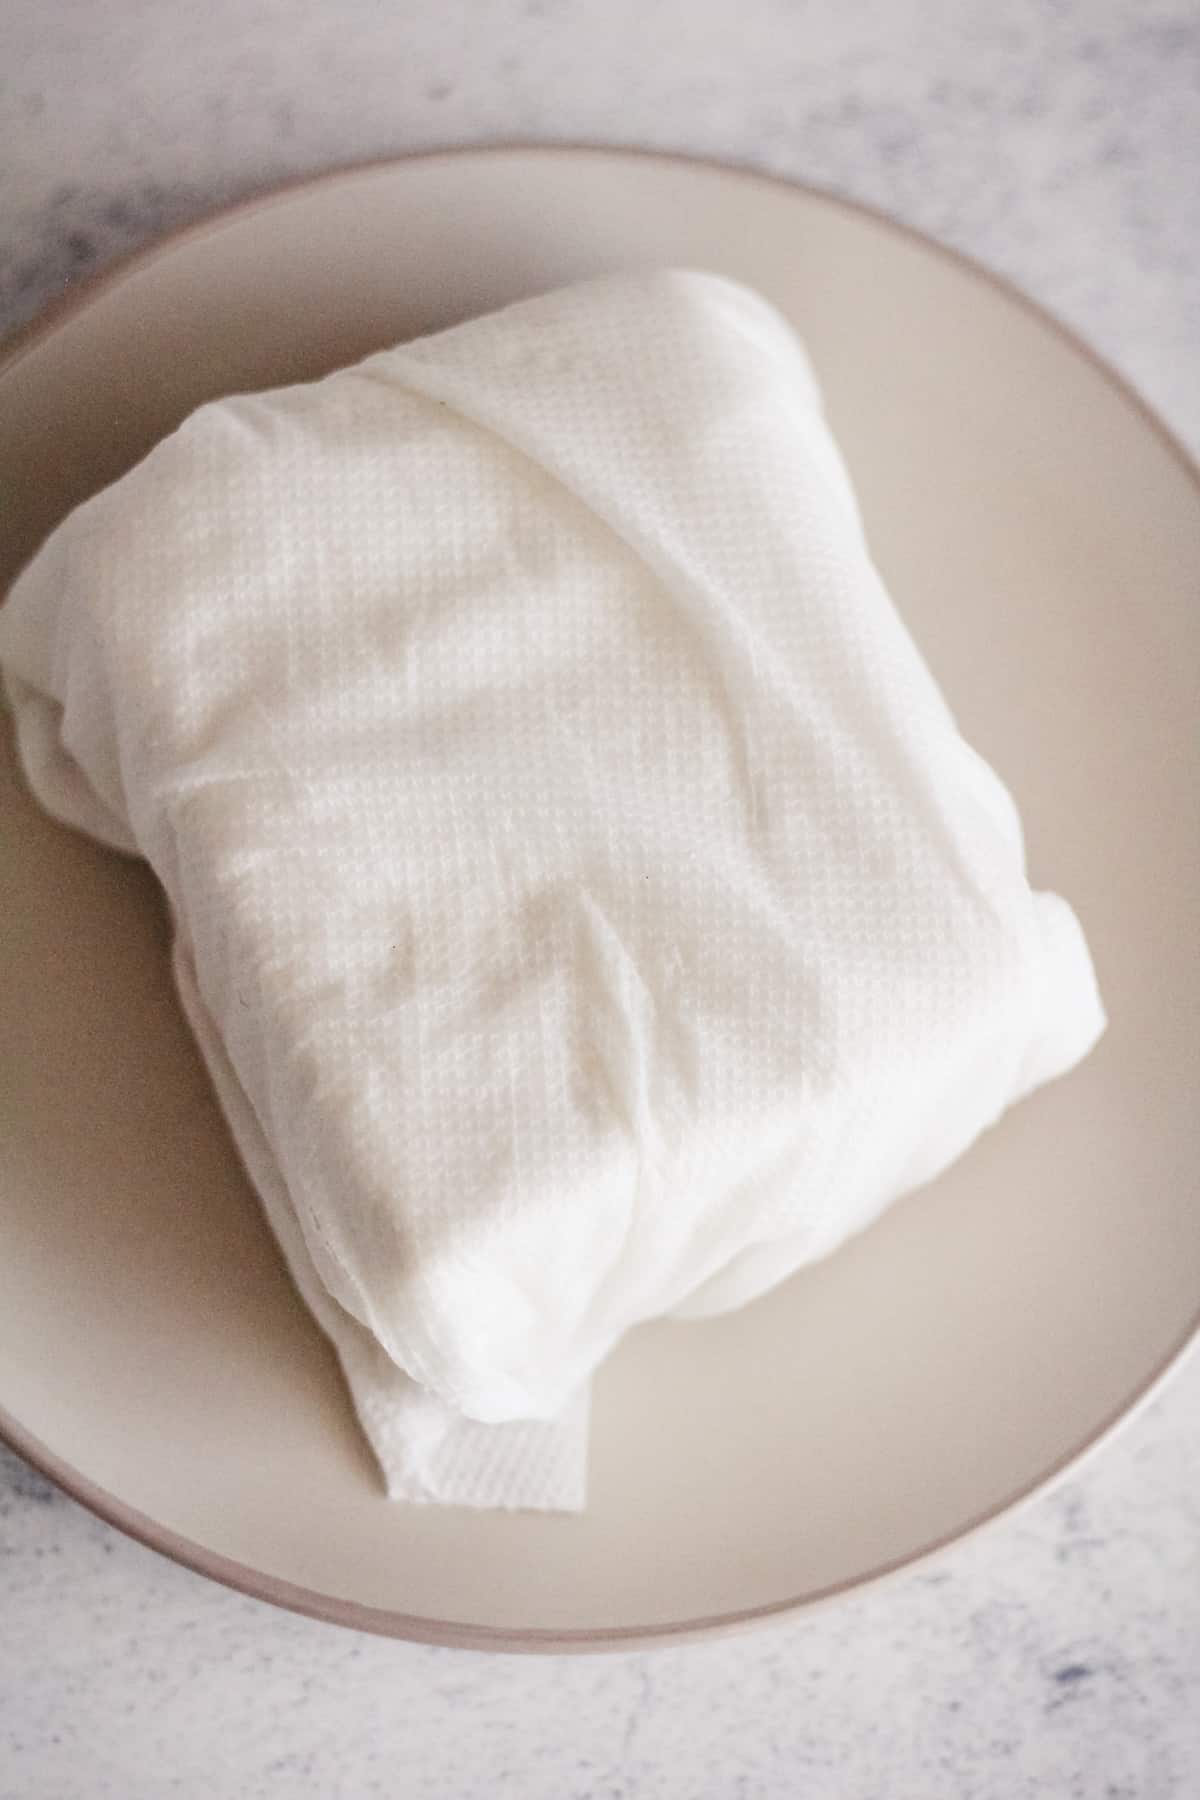 Tofu wrapped in paper towels on a plate.